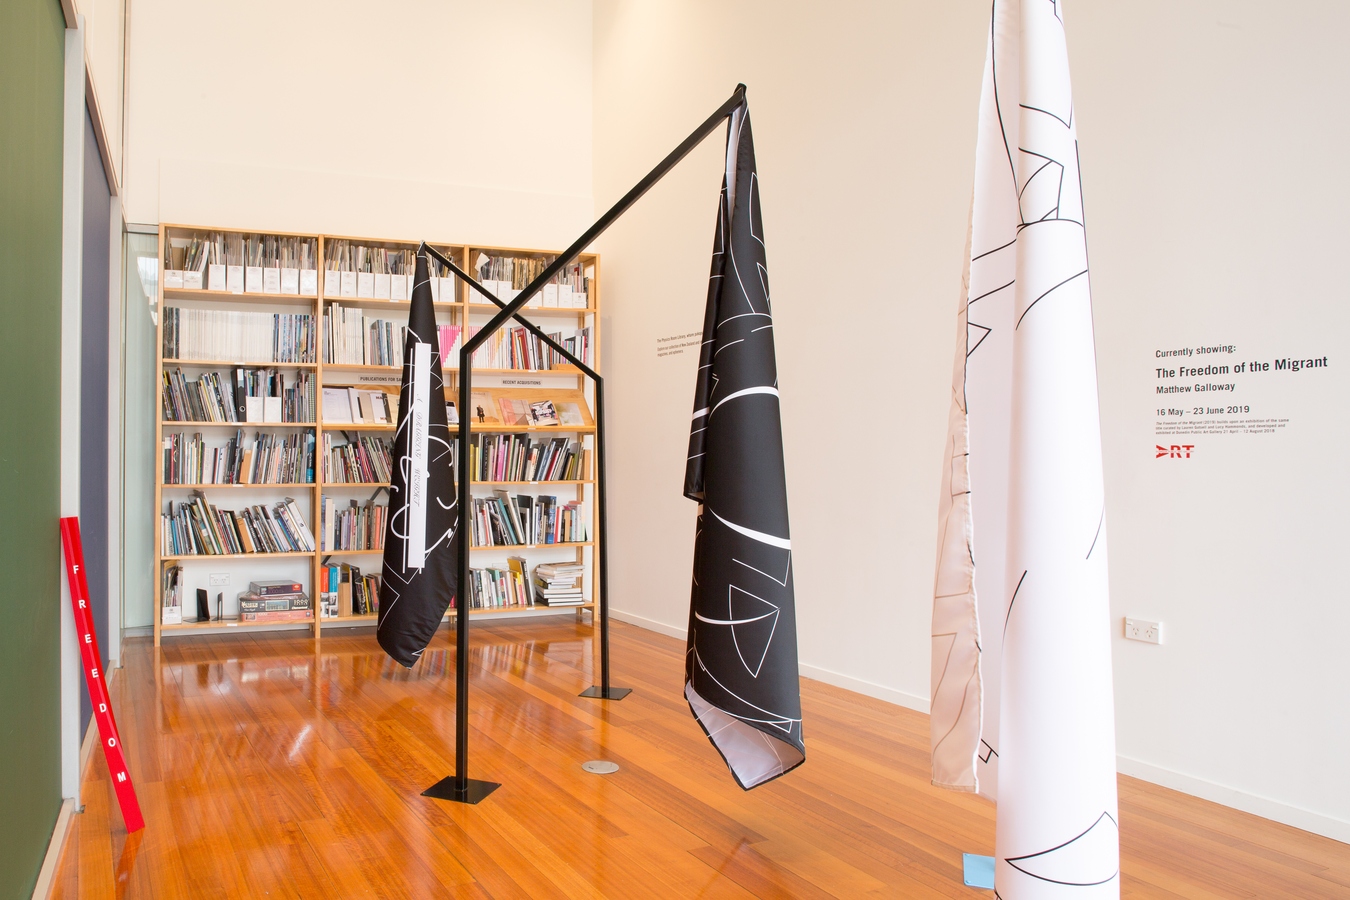 Image: Installation view of The Freedom of the Migrant, Matthew Galloway. Photo: Janneth Gil.